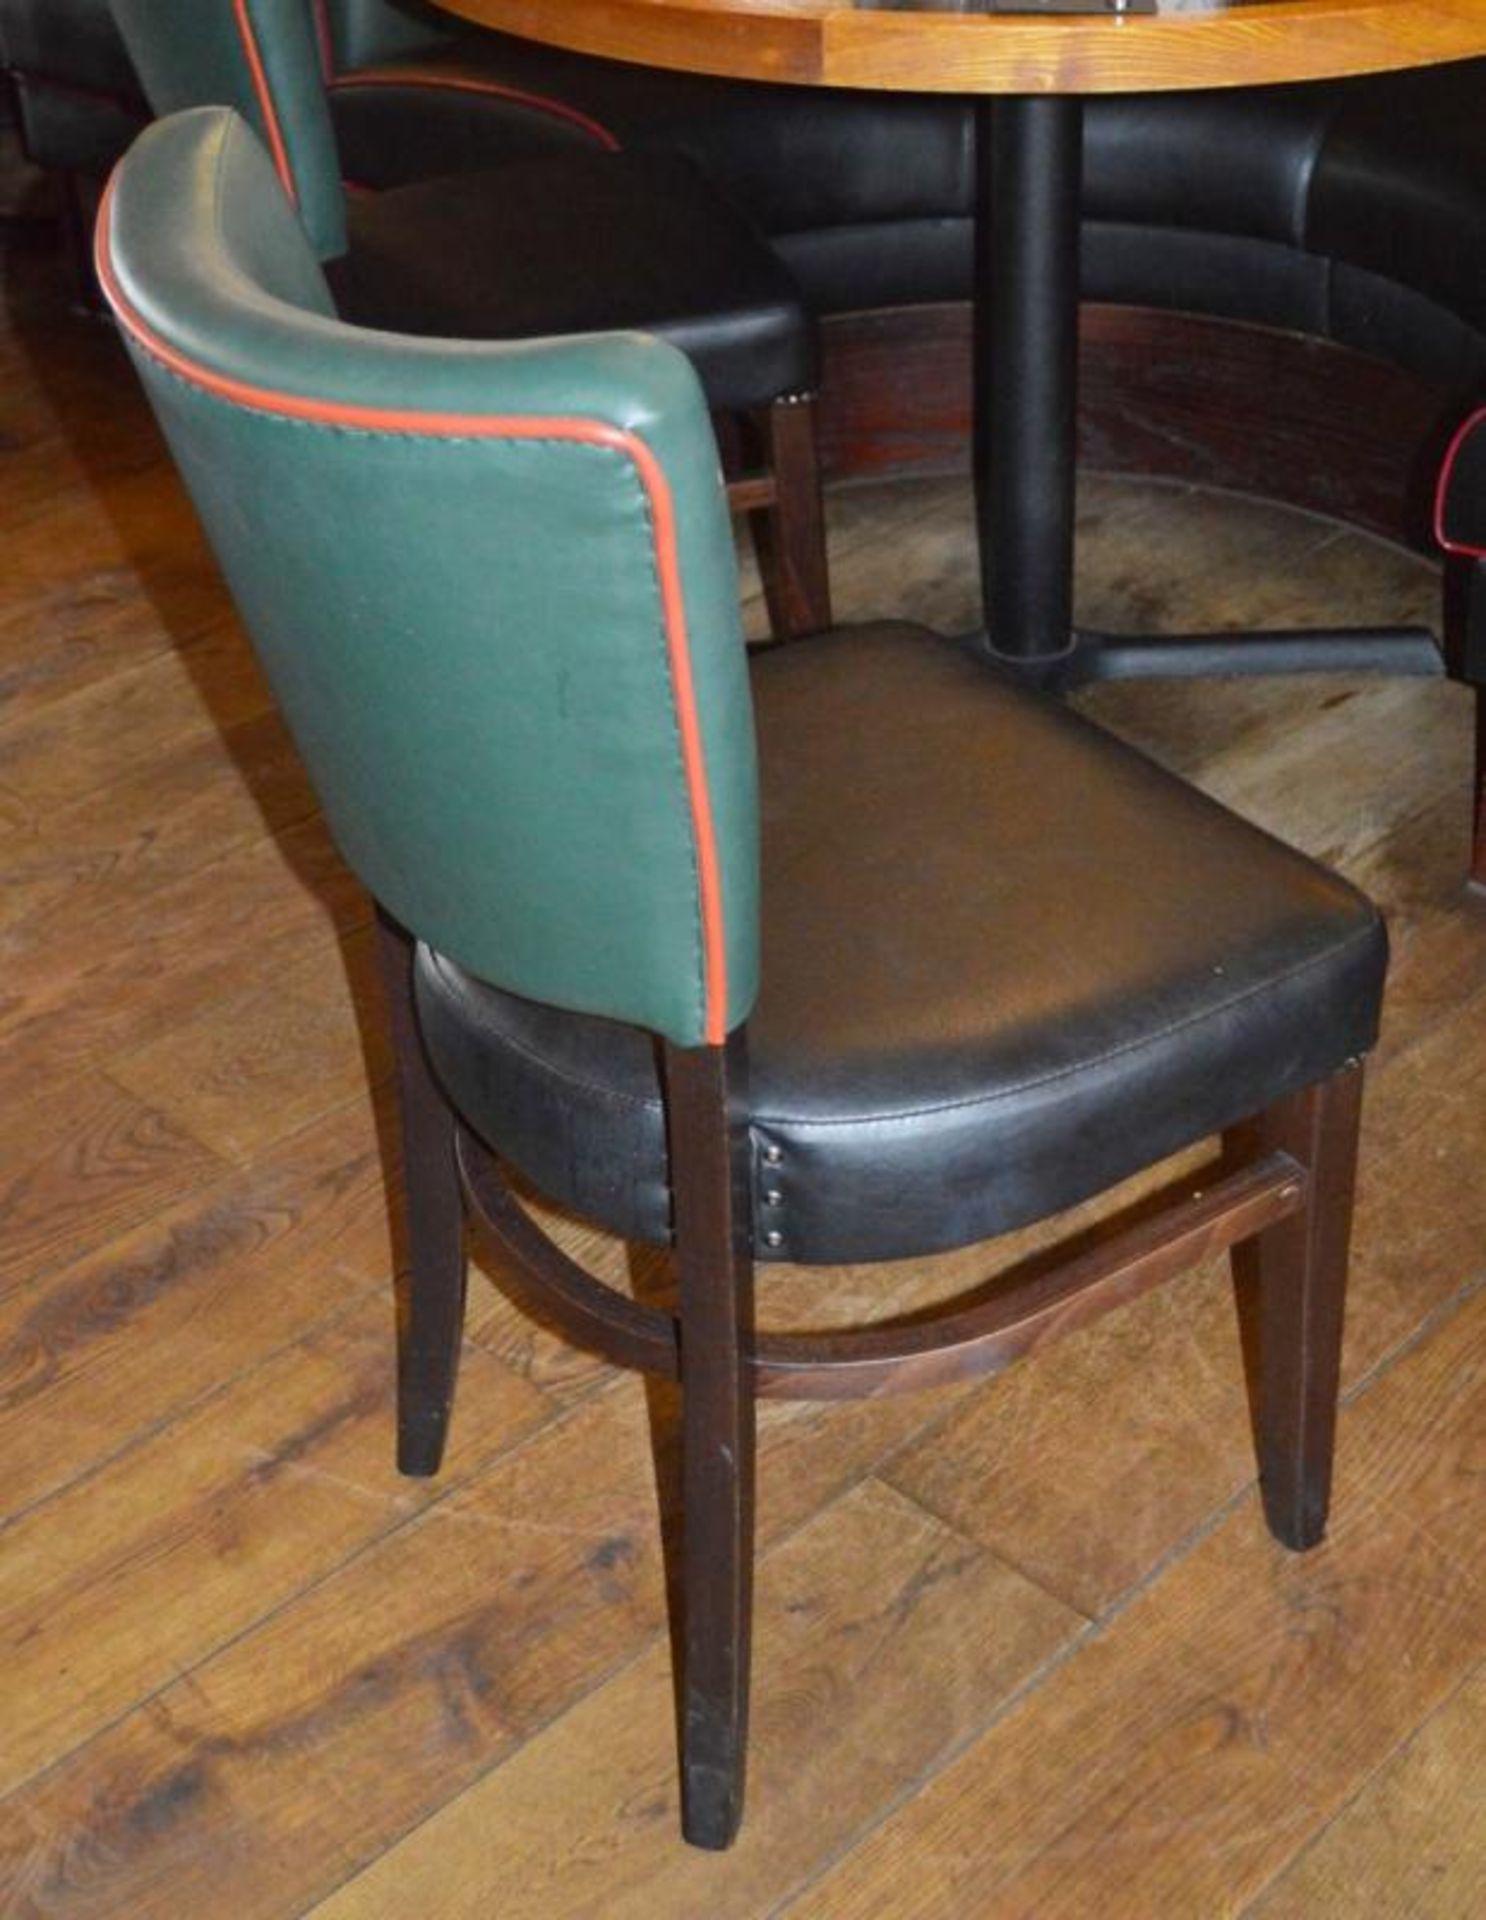 9 x Contemporary Button Back Restaurant Dining Chairs - Upholstered in a Quality Green and Black - Image 5 of 5